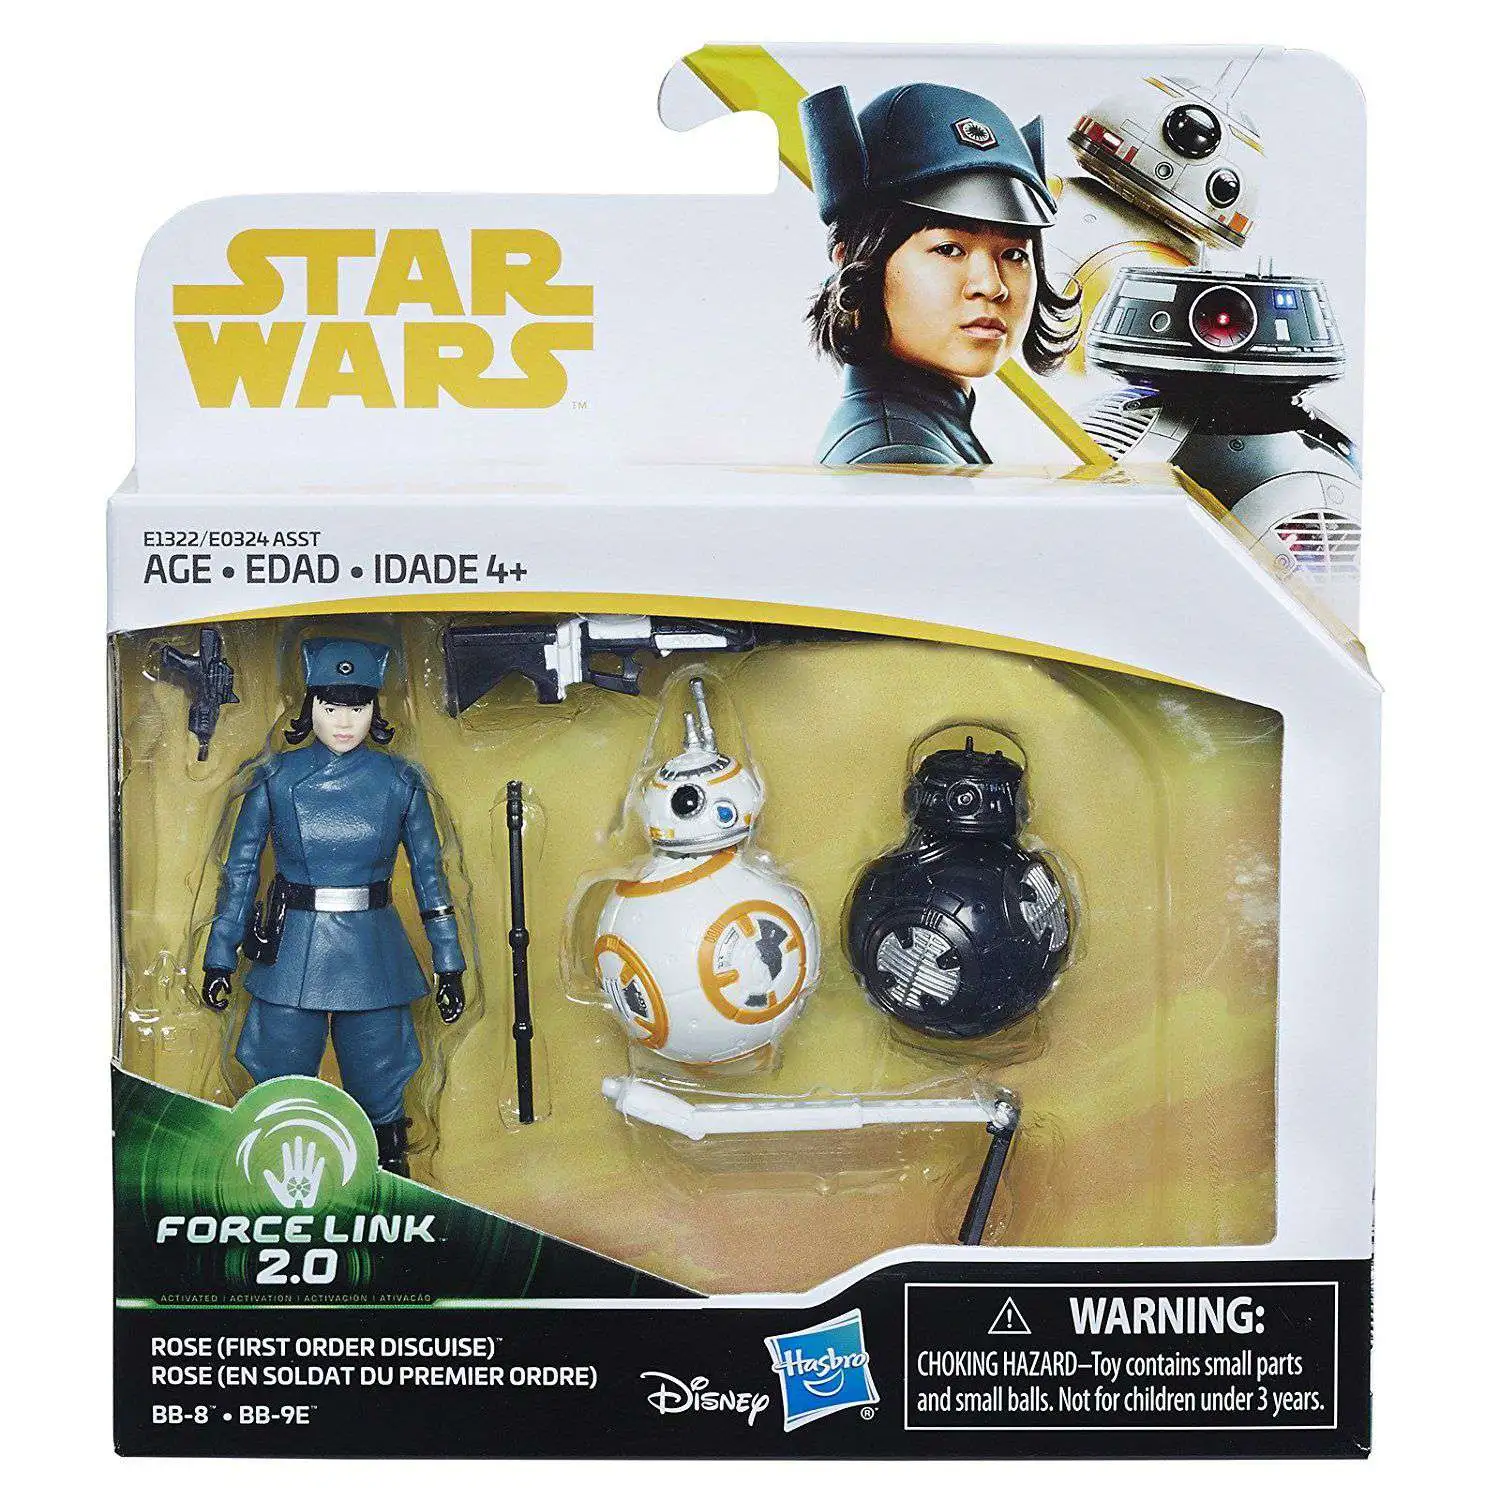 Hasbro The Force Awakens BB-8 Droid Action Figure for sale online 